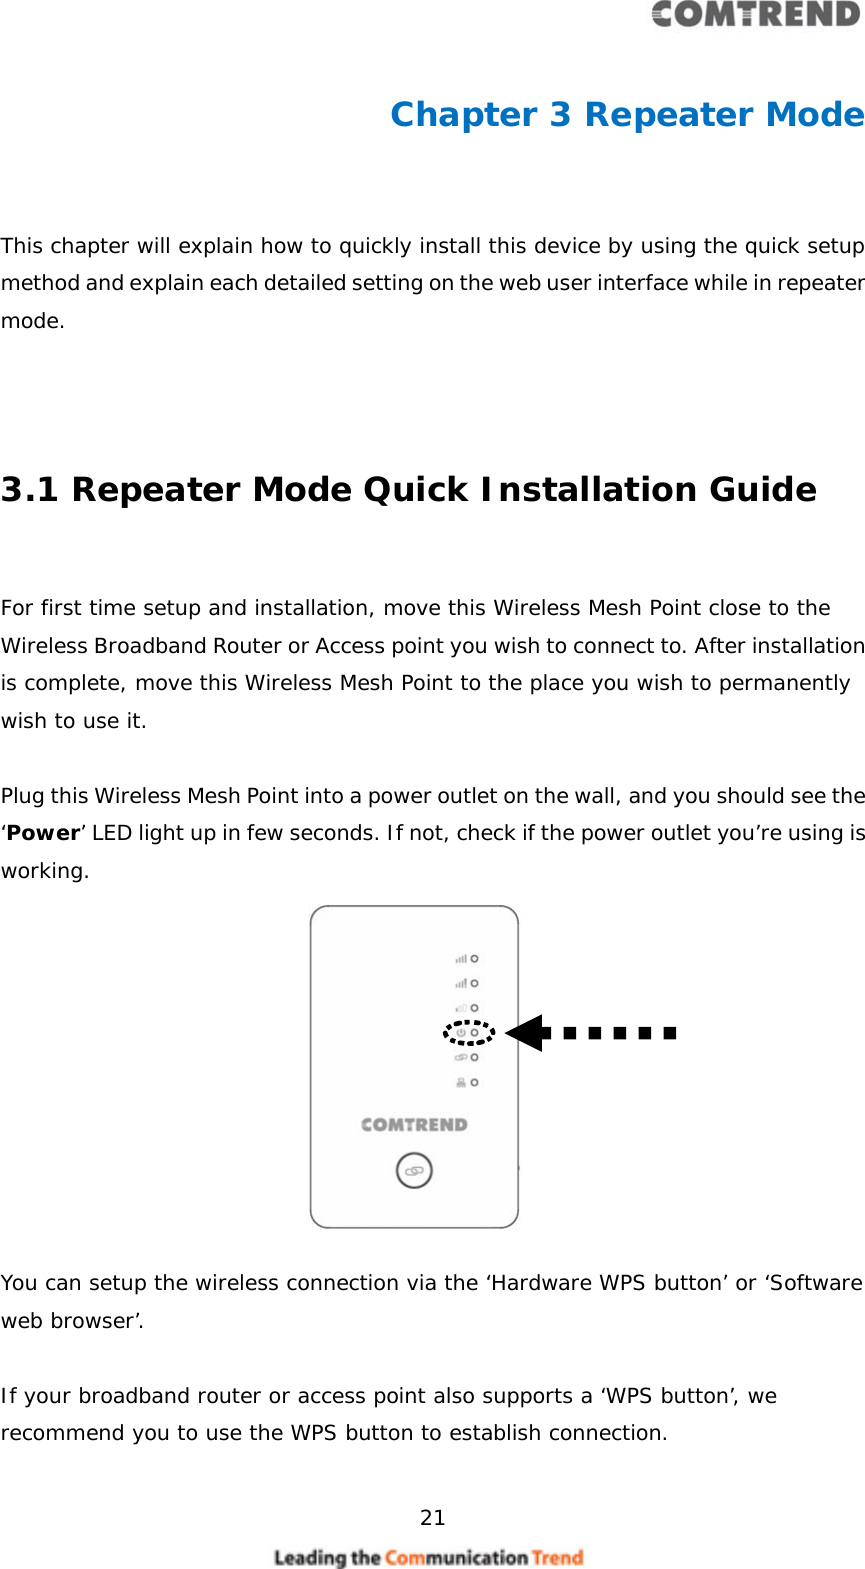     21  Chapter 3 Repeater Mode  This chapter will explain how to quickly install this device by using the quick setup method and explain each detailed setting on the web user interface while in repeater mode.    3.1 Repeater Mode Quick Installation Guide  For first time setup and installation, move this Wireless Mesh Point close to the Wireless Broadband Router or Access point you wish to connect to. After installation is complete, move this Wireless Mesh Point to the place you wish to permanently wish to use it.  Plug this Wireless Mesh Point into a power outlet on the wall, and you should see the ‘Power’ LED light up in few seconds. If not, check if the power outlet you’re using is working.           You can setup the wireless connection via the ‘Hardware WPS button’ or ‘Software web browser’.  If your broadband router or access point also supports a ‘WPS button’, we recommend you to use the WPS button to establish connection.   